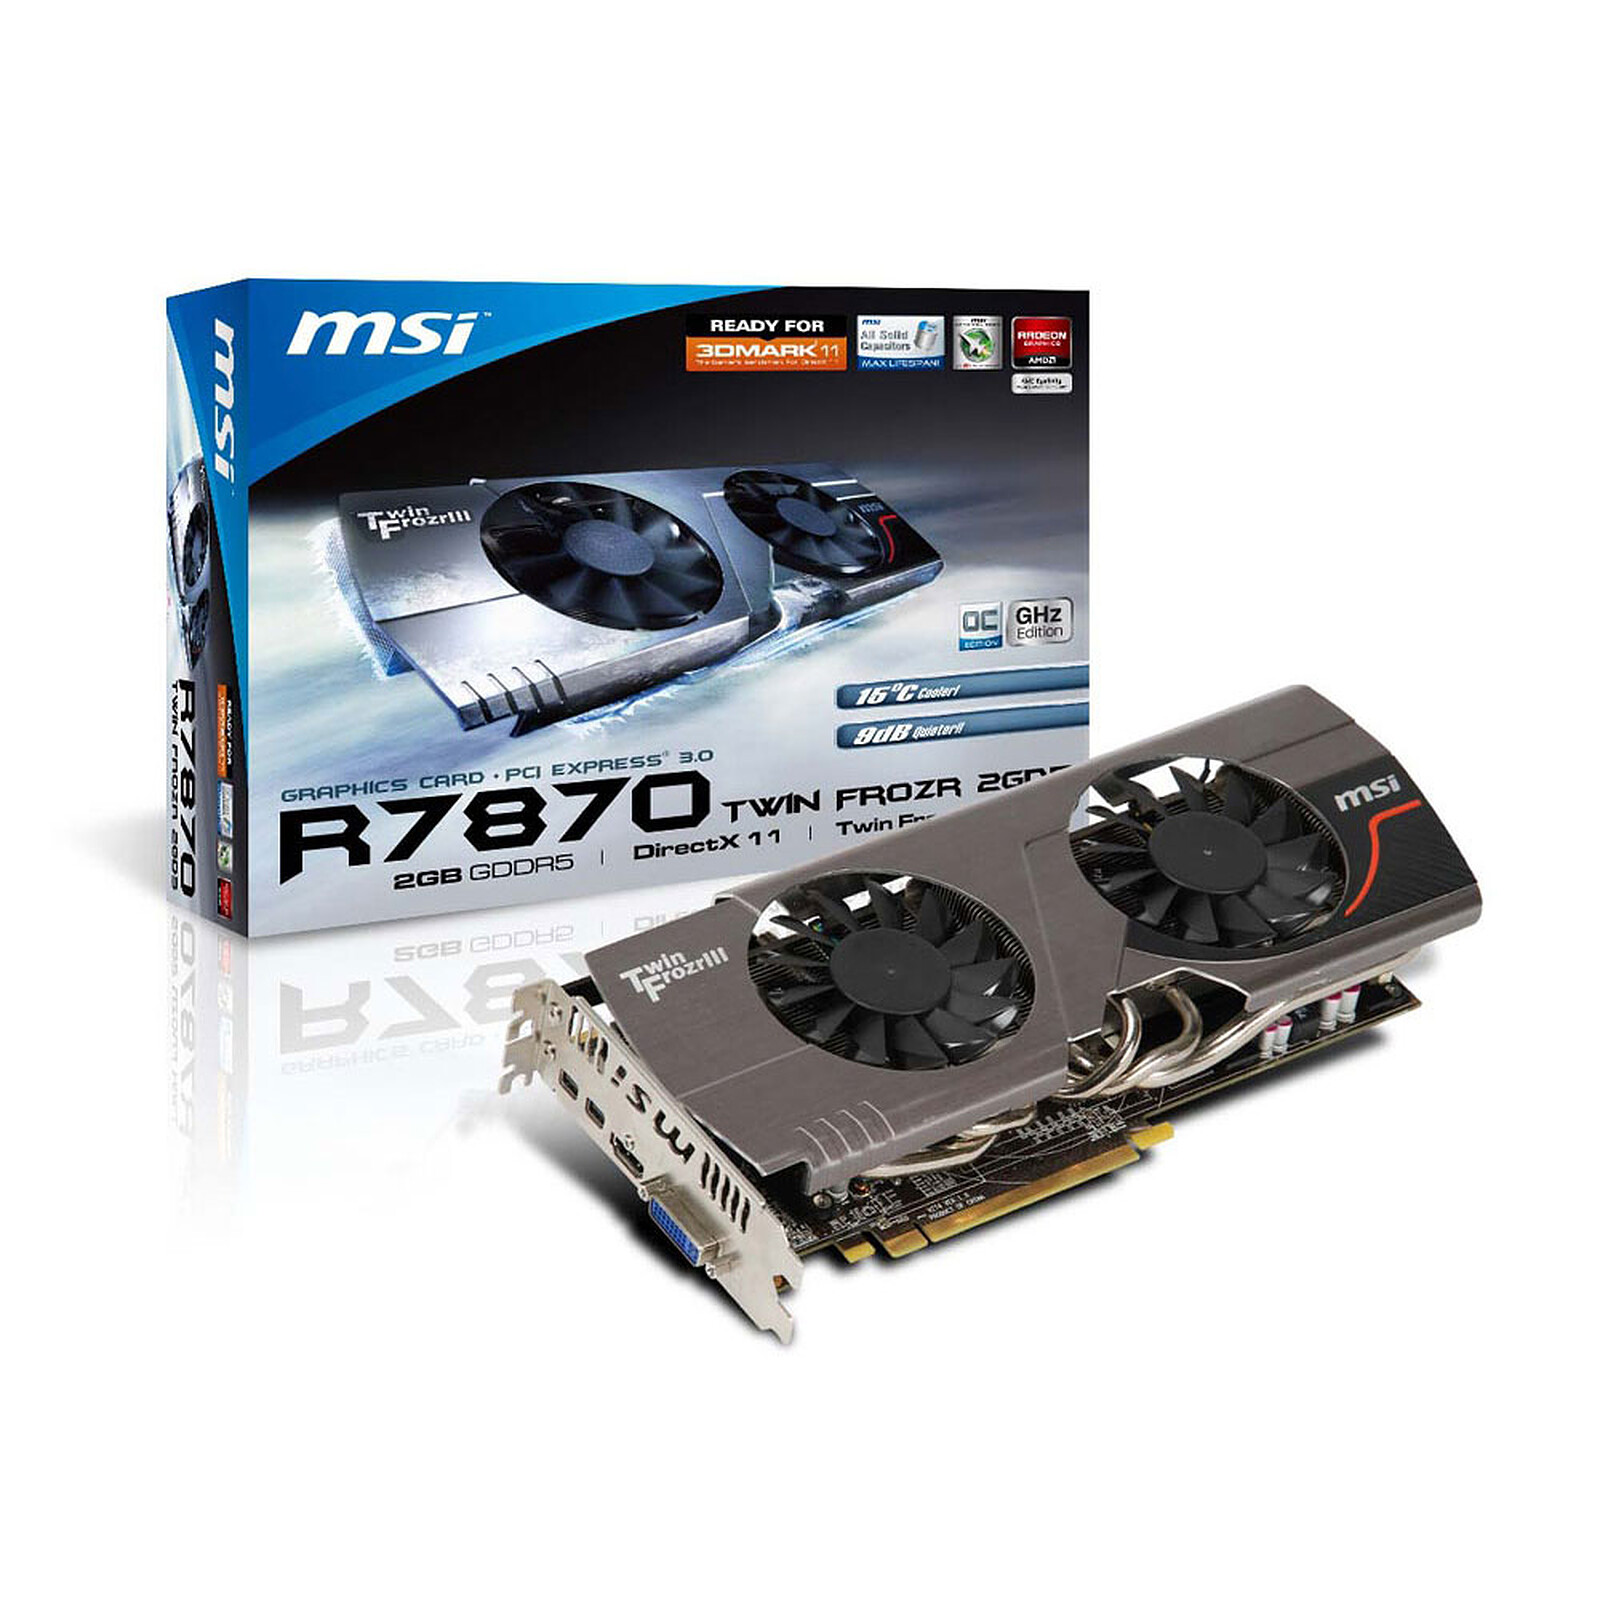 Msi R7870 Twin Frozr 2gd5 Oc 2 Go Carte Graphique Msi Sur Ldlc Museericorde